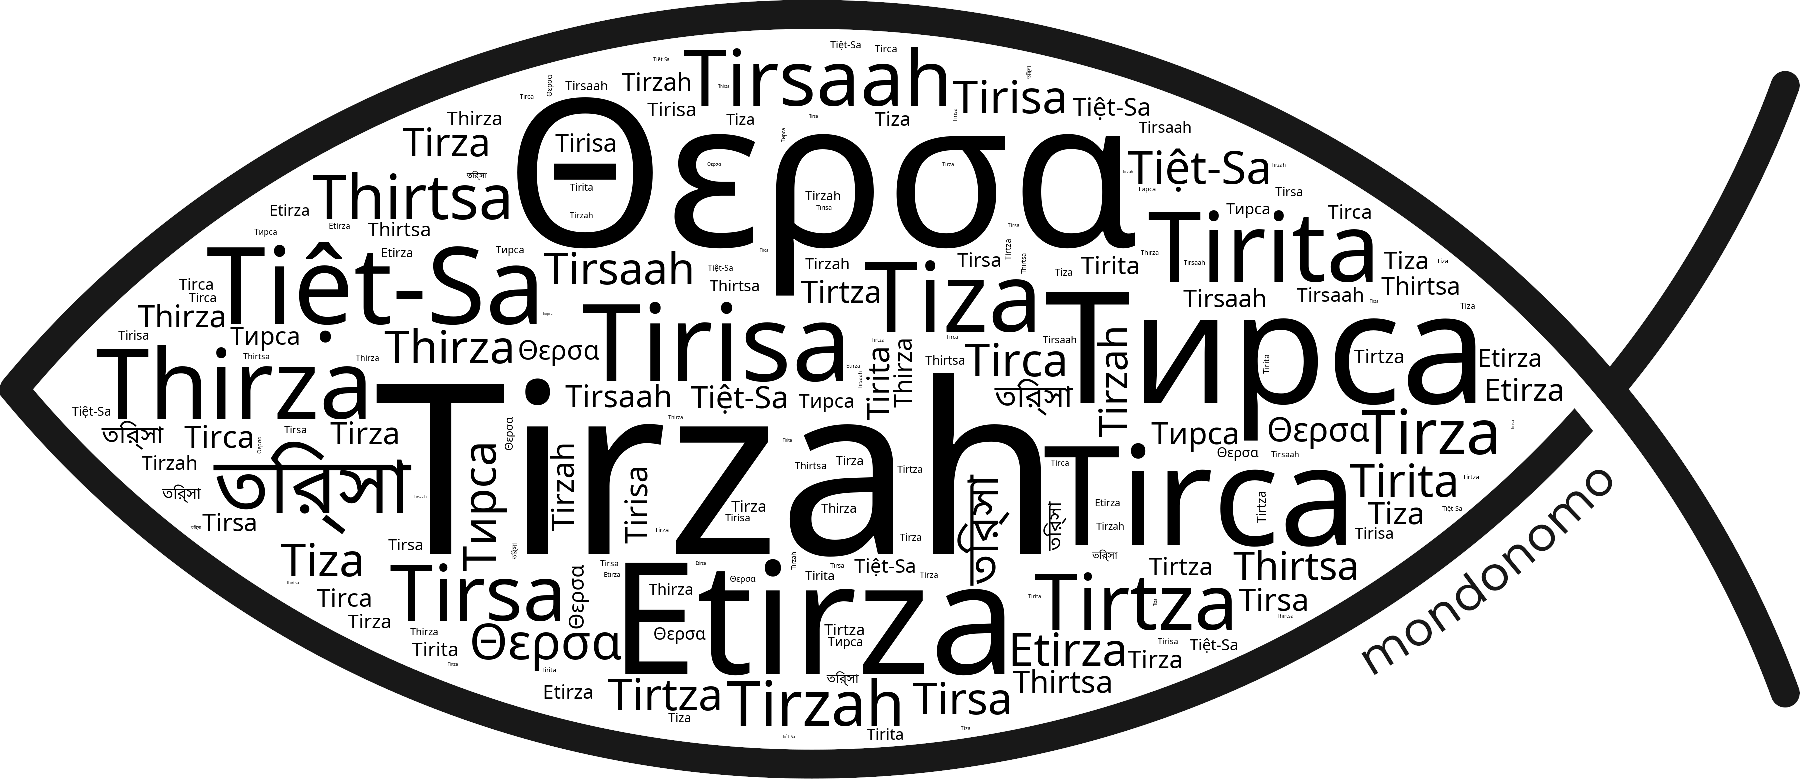 Name Tirzah in the world's Bibles